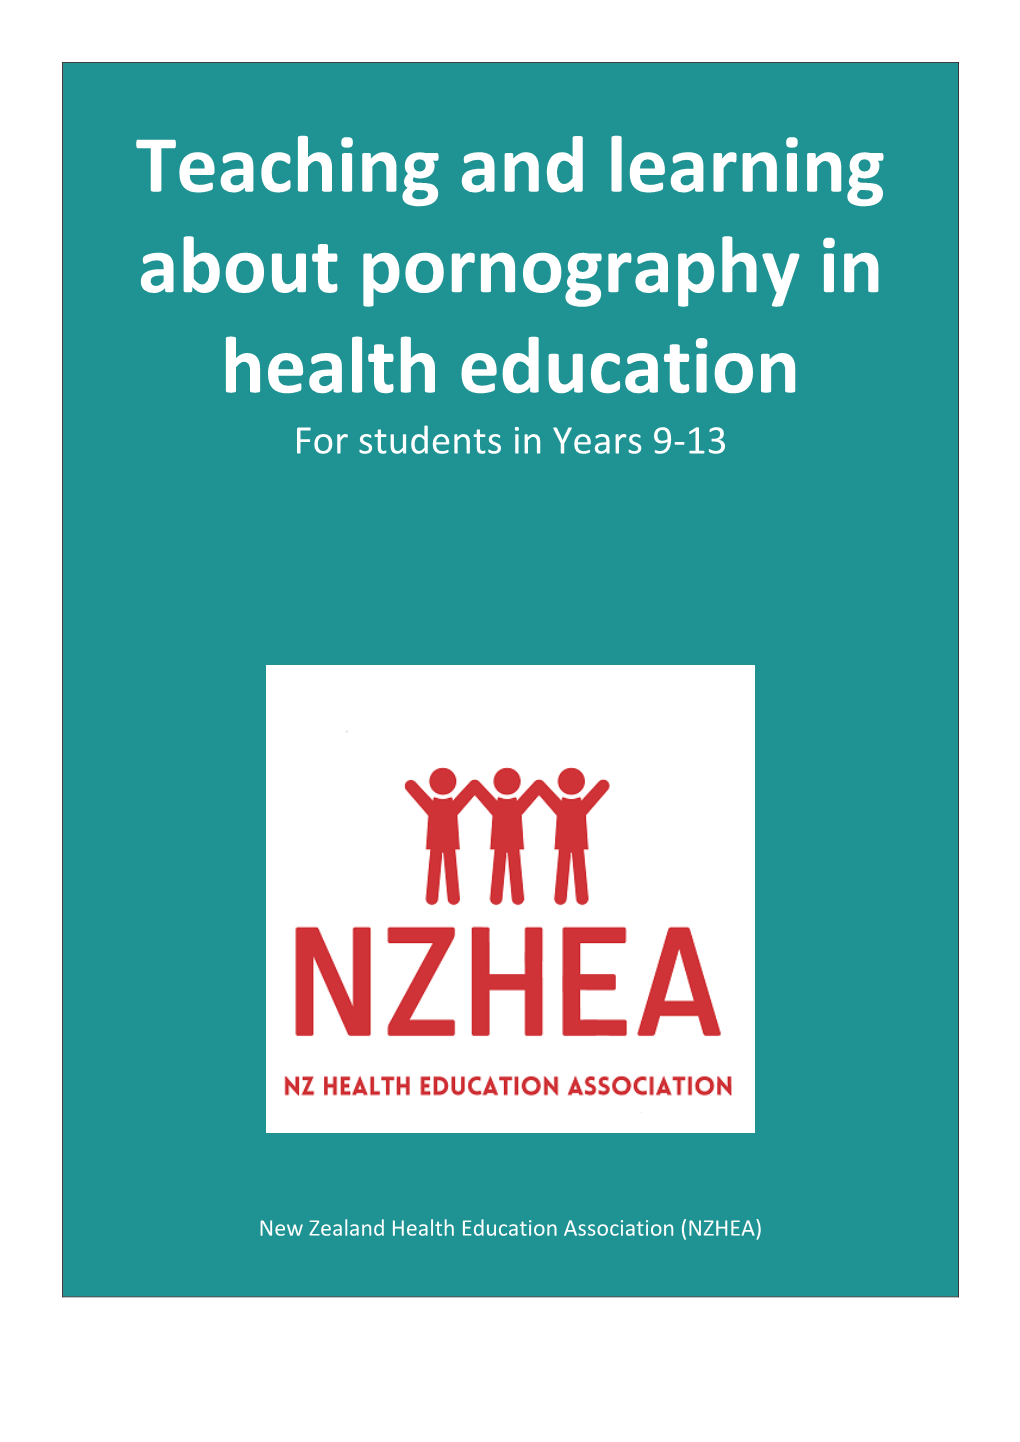 Teaching and Learning About Pornography in Health Education for Students in Years 9-13